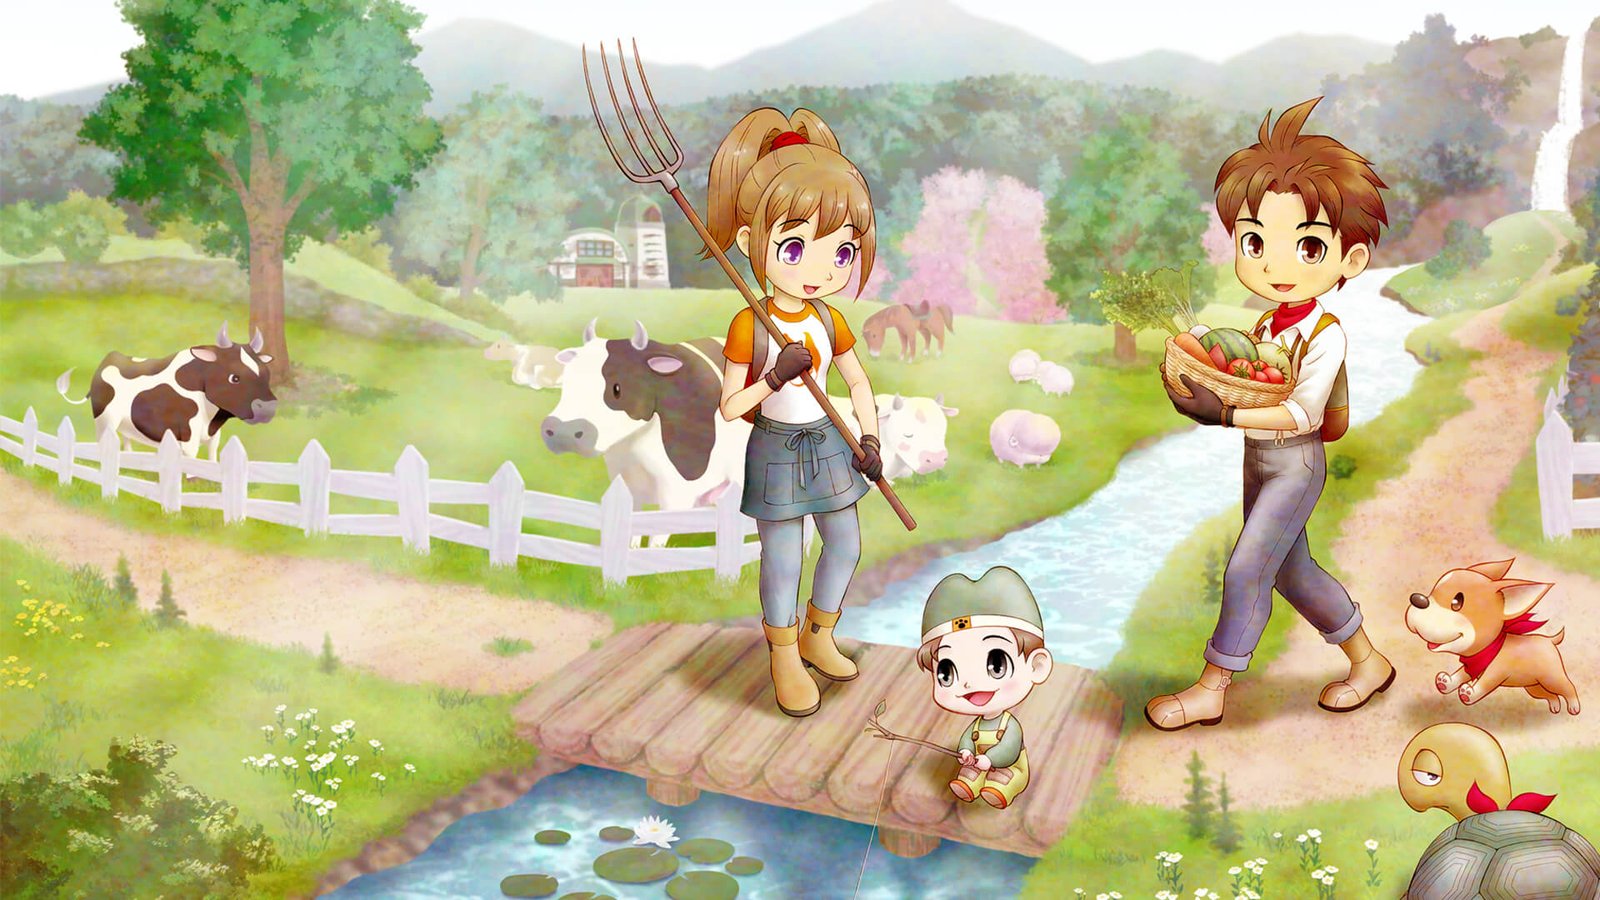 Review – Story of Seasons: A Wonderful Life